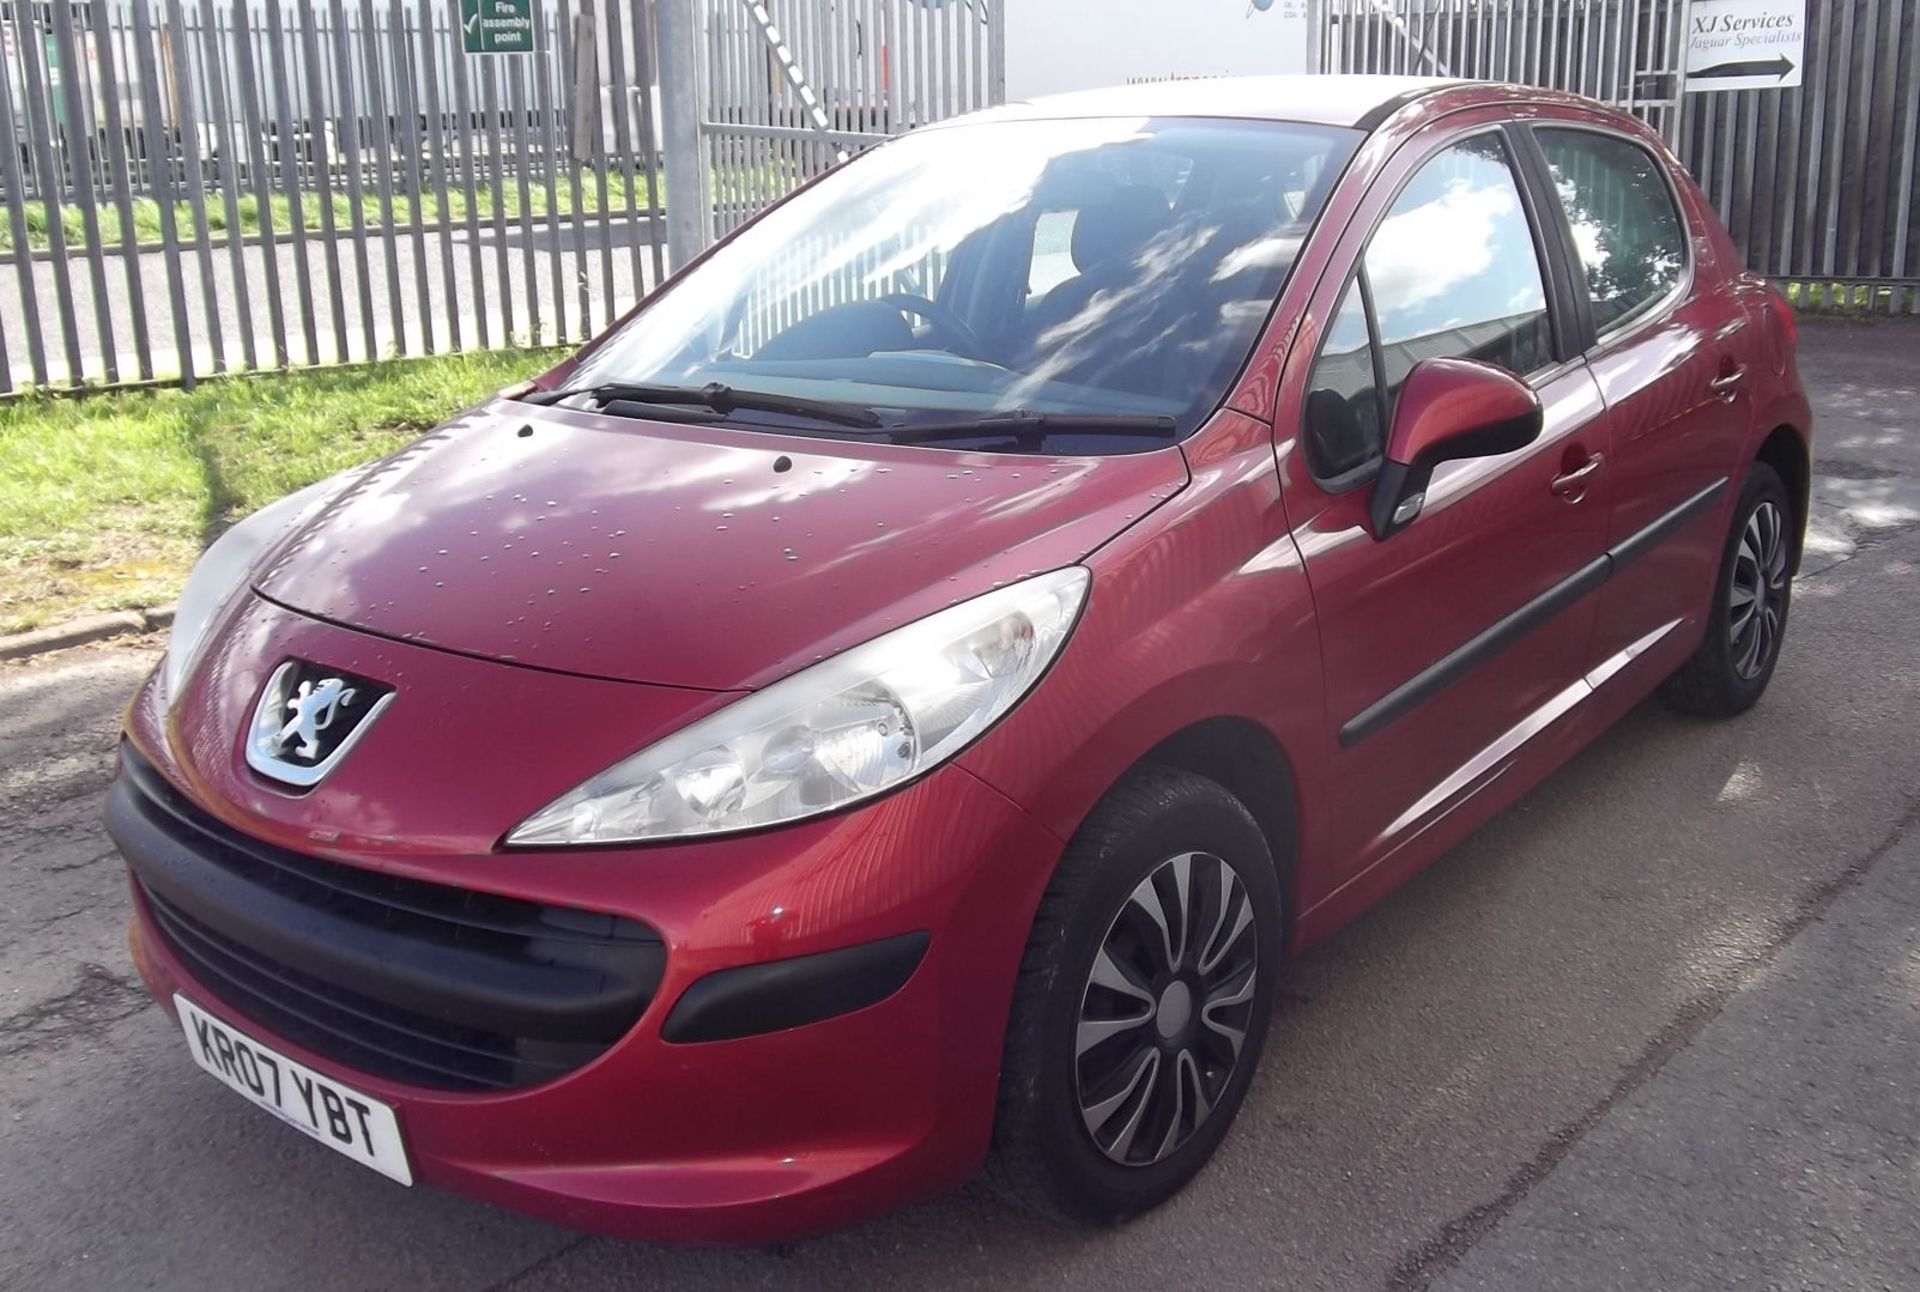 2007 Peugeot 207 1.6 HdiS 5 Door Hatchback - CL505 - NO VAT ON THE HAMMER - Location: Corby - Image 6 of 9